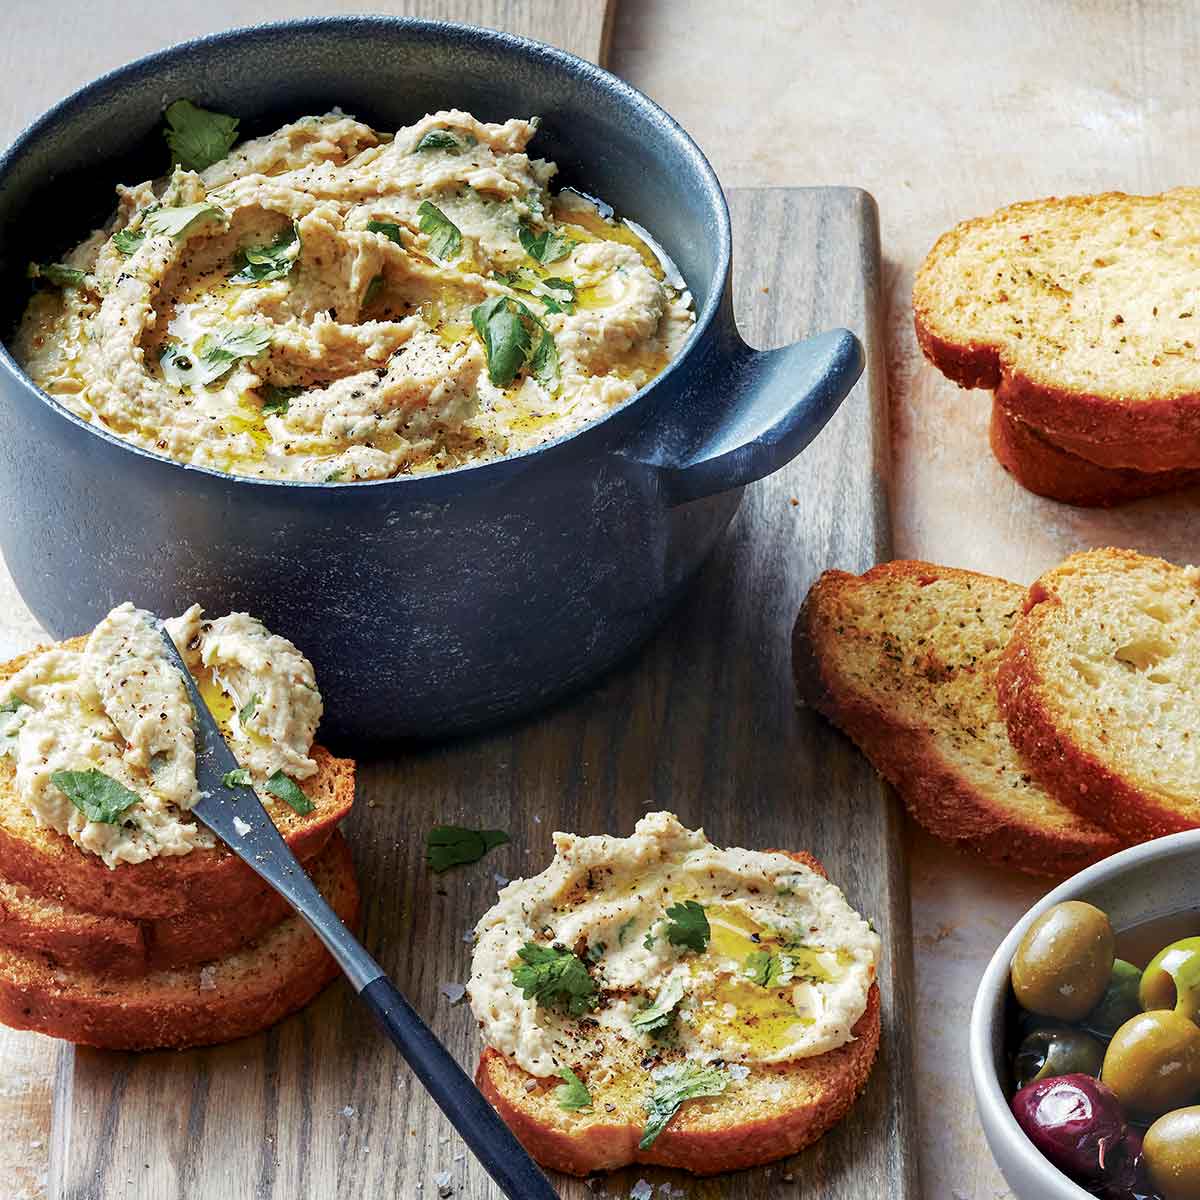 A round blue dish filled with white bean dip, with some spread on crostini scattered around the bowl and a small dish of olives on the side.